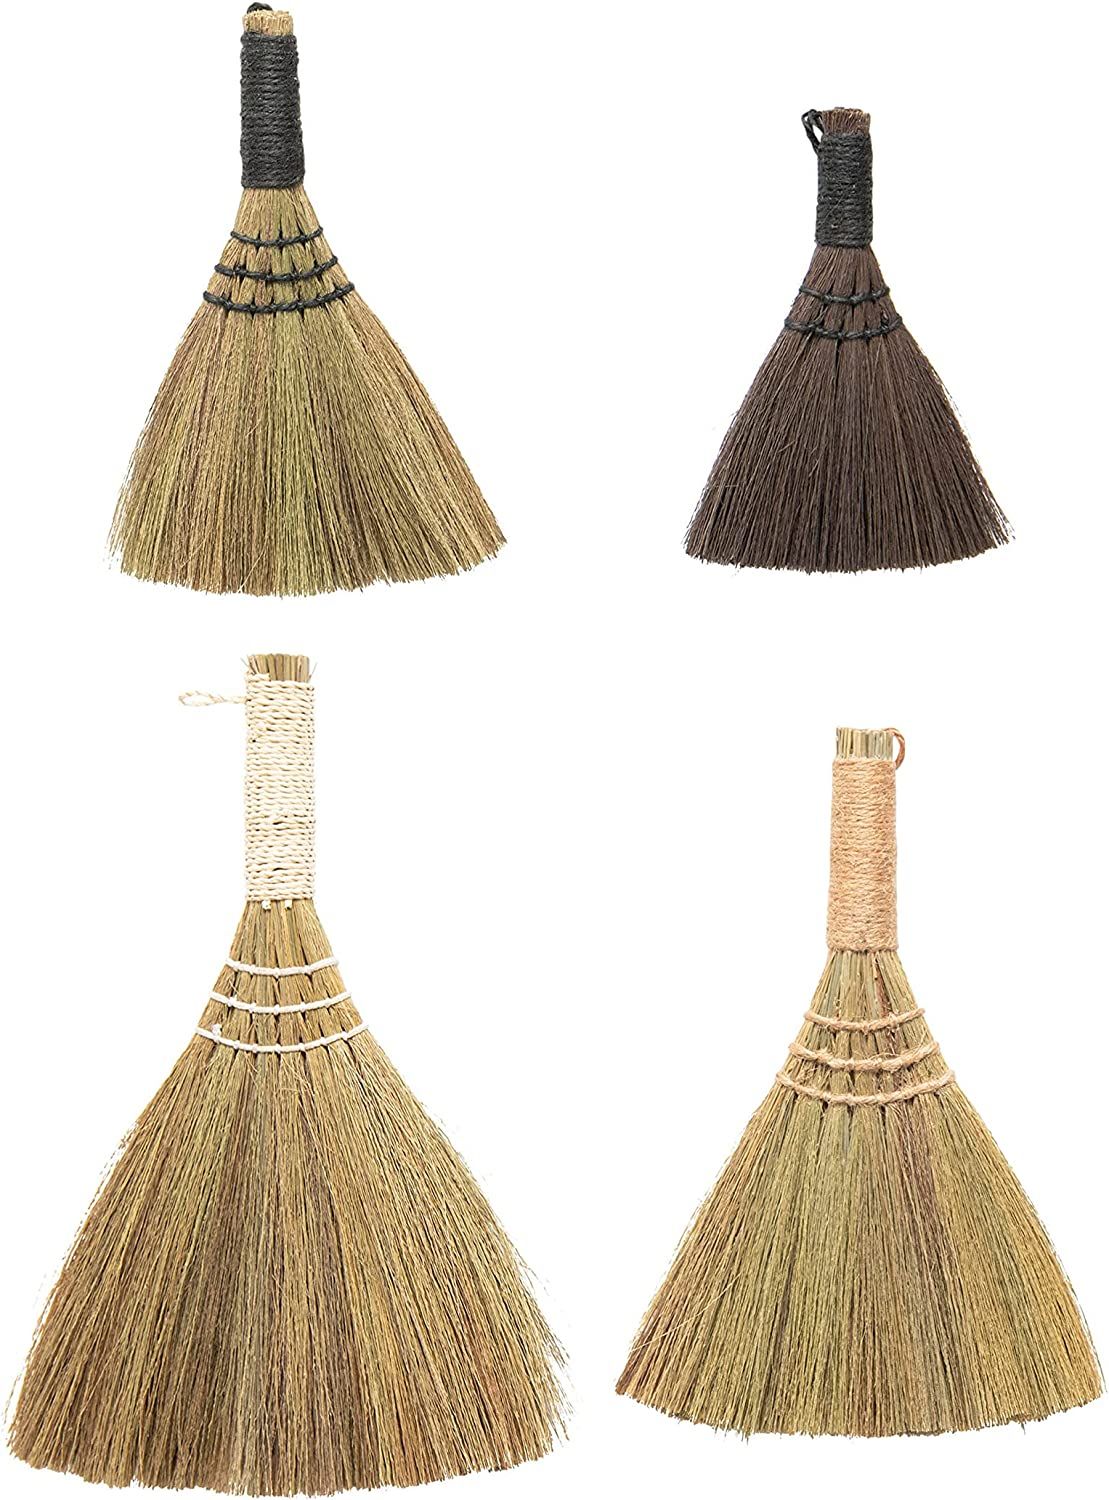 Creative Co-Op Yarn Wrapped Handles, Multi Color Neutrals, Set of 4 Whisk Broom, 4 | Amazon (US)